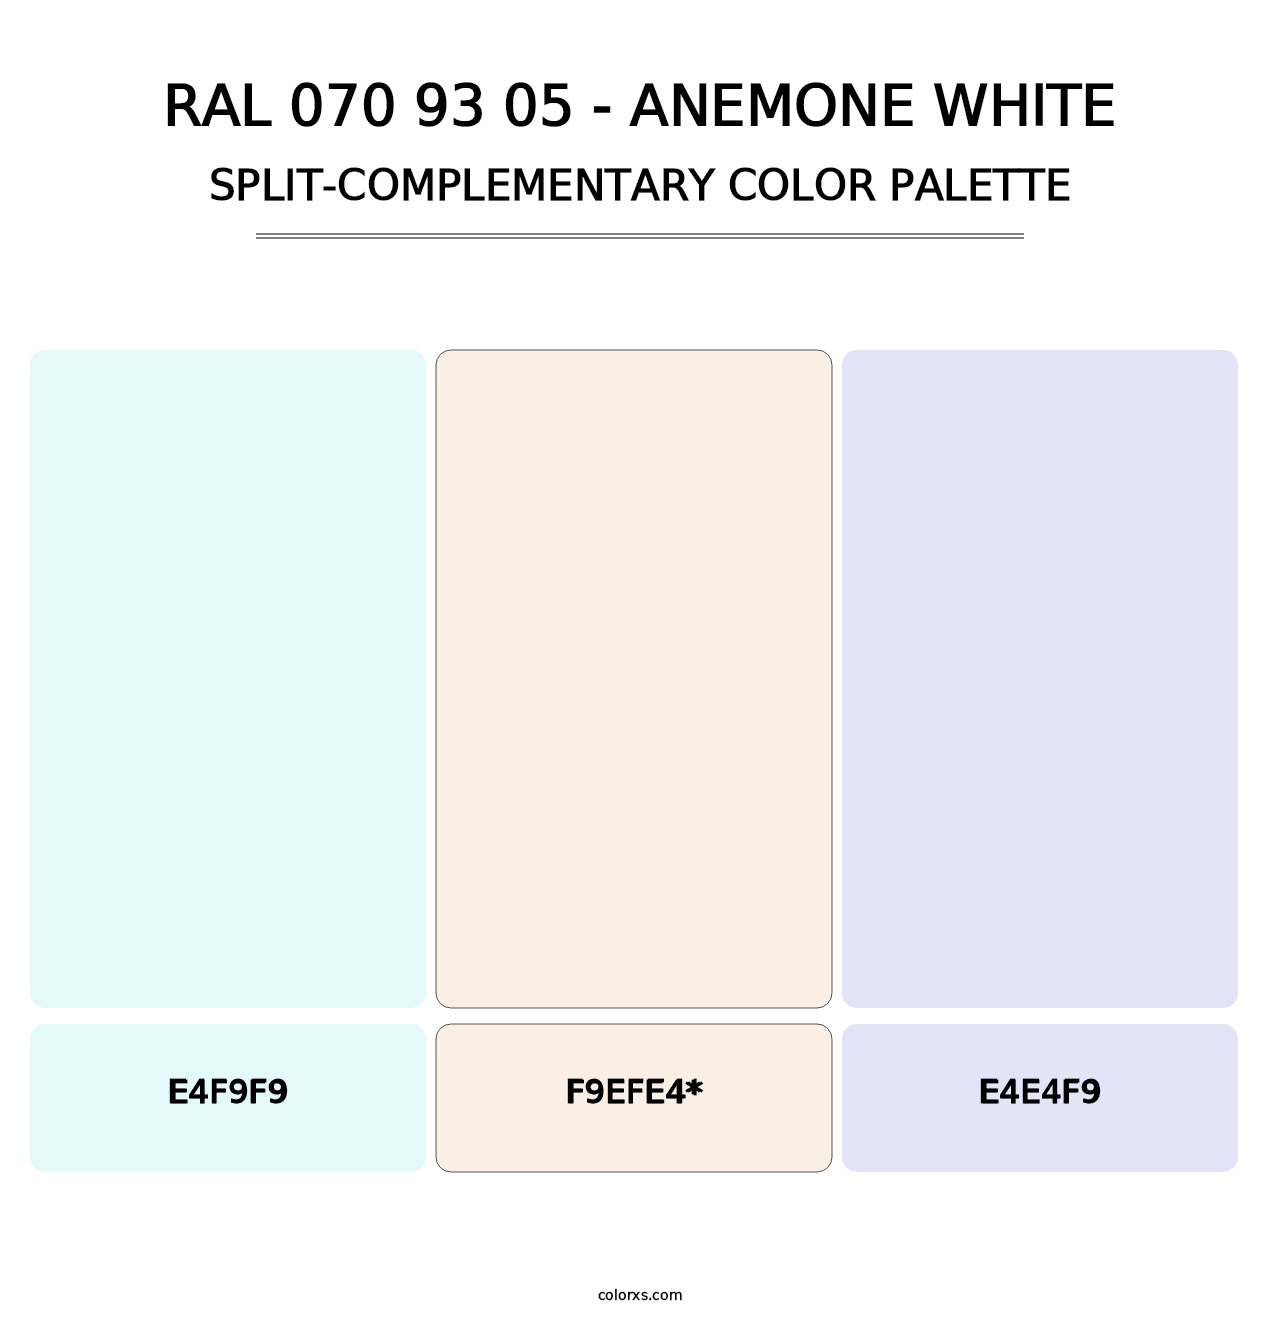 RAL 070 93 05 - Anemone White - Split-Complementary Color Palette